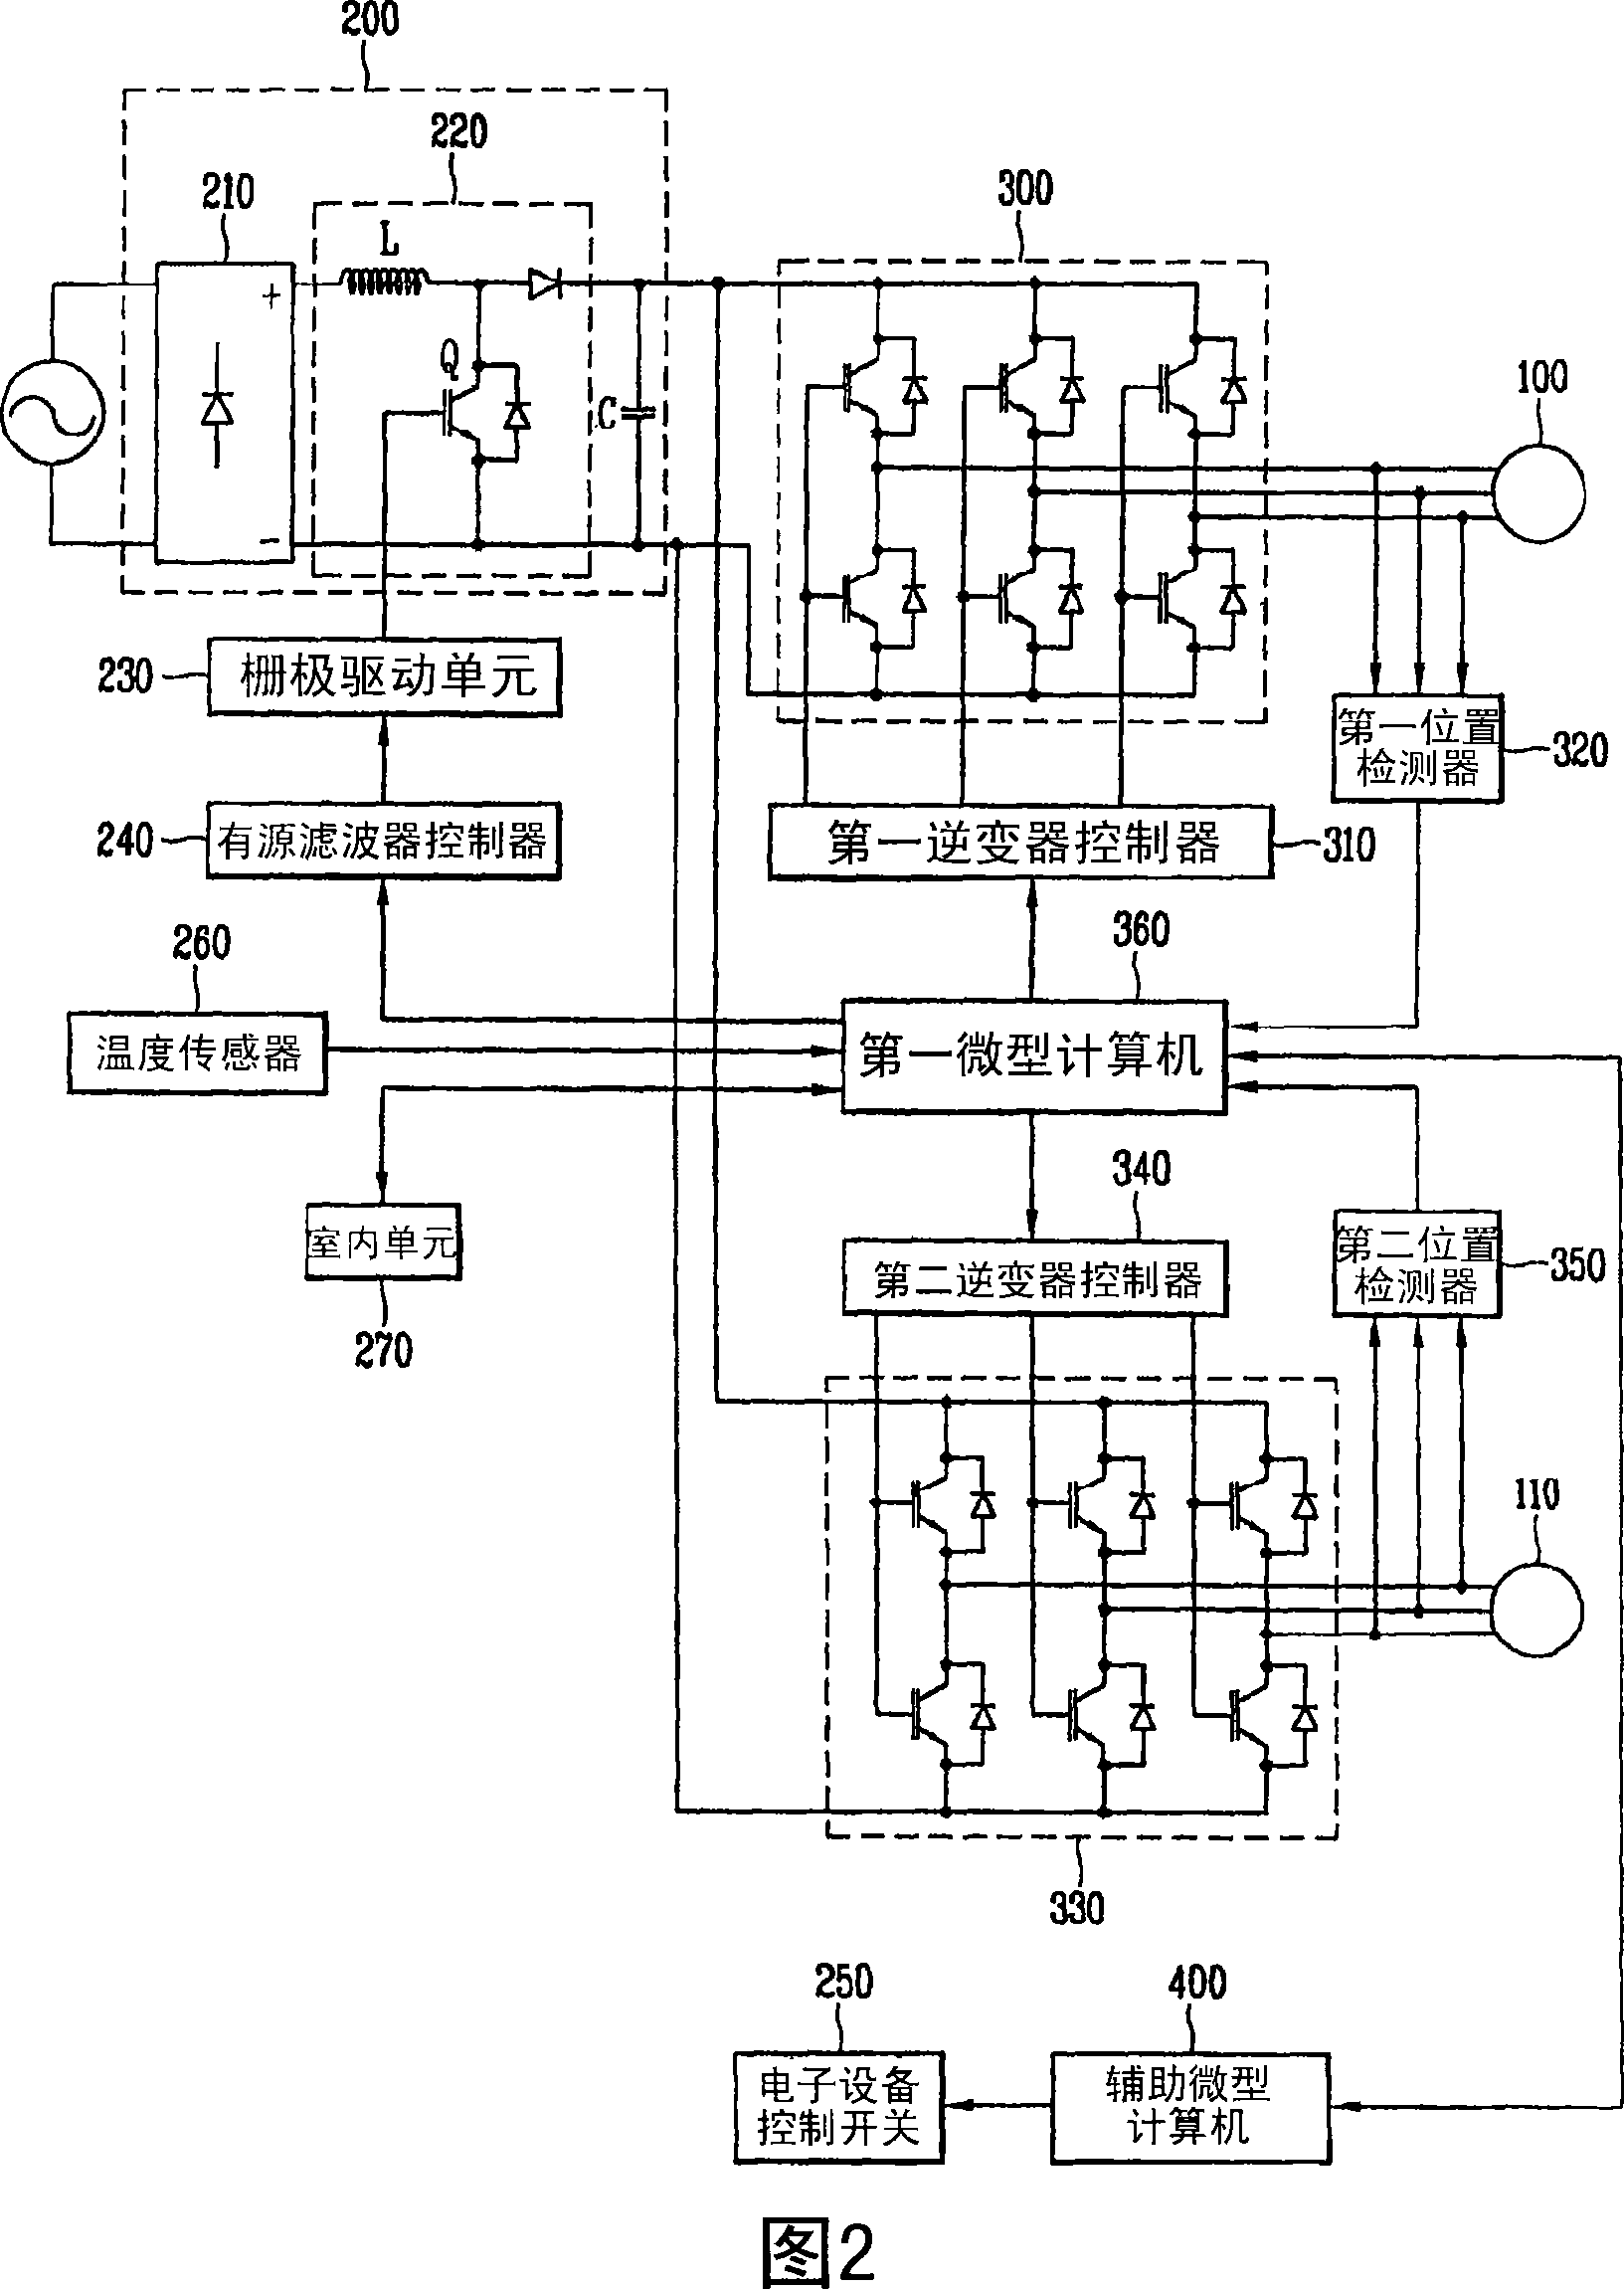 Apparatus and method for controlling air conditioner